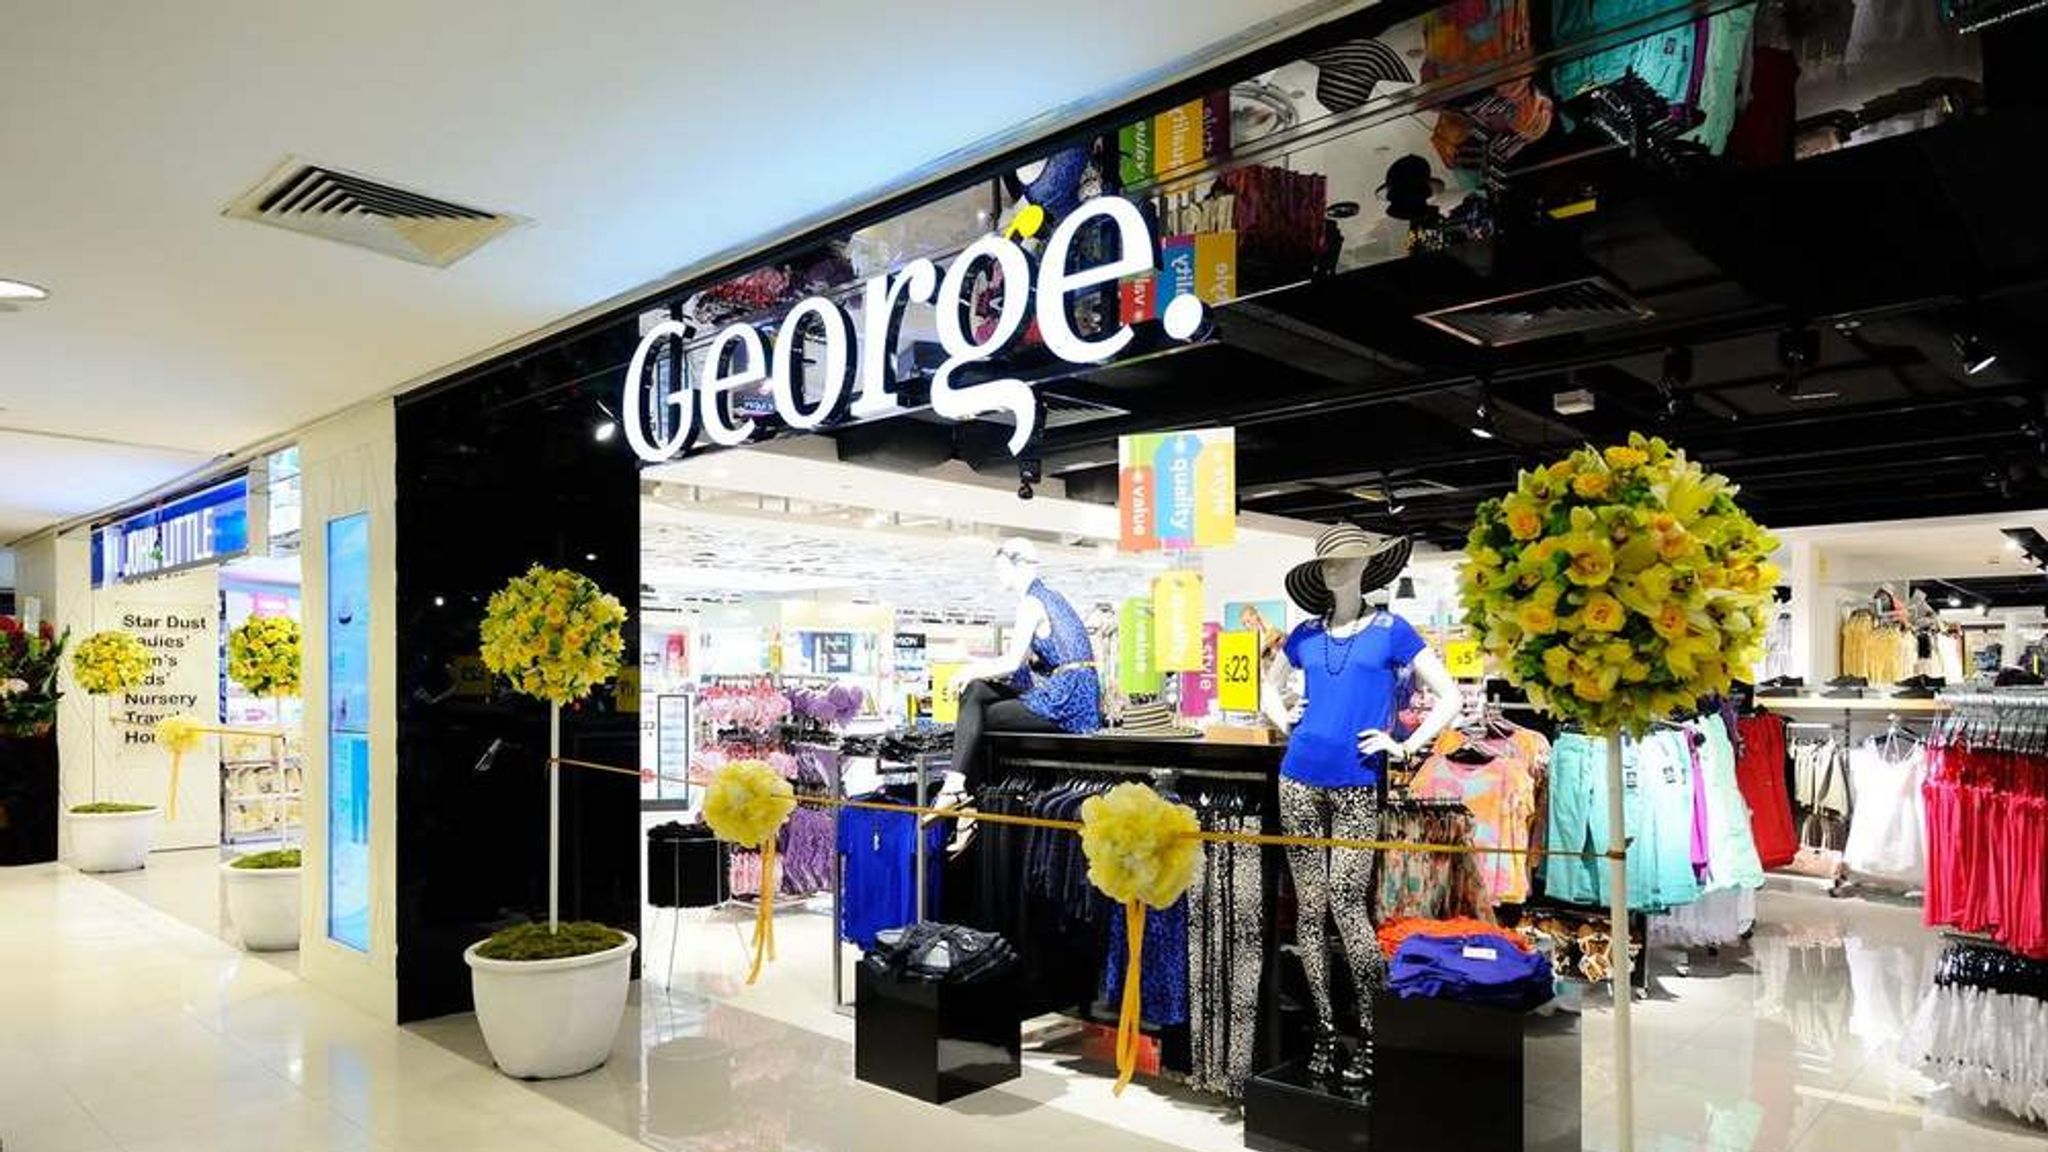 George at Asda to list second-tier supplier factories - Just Style